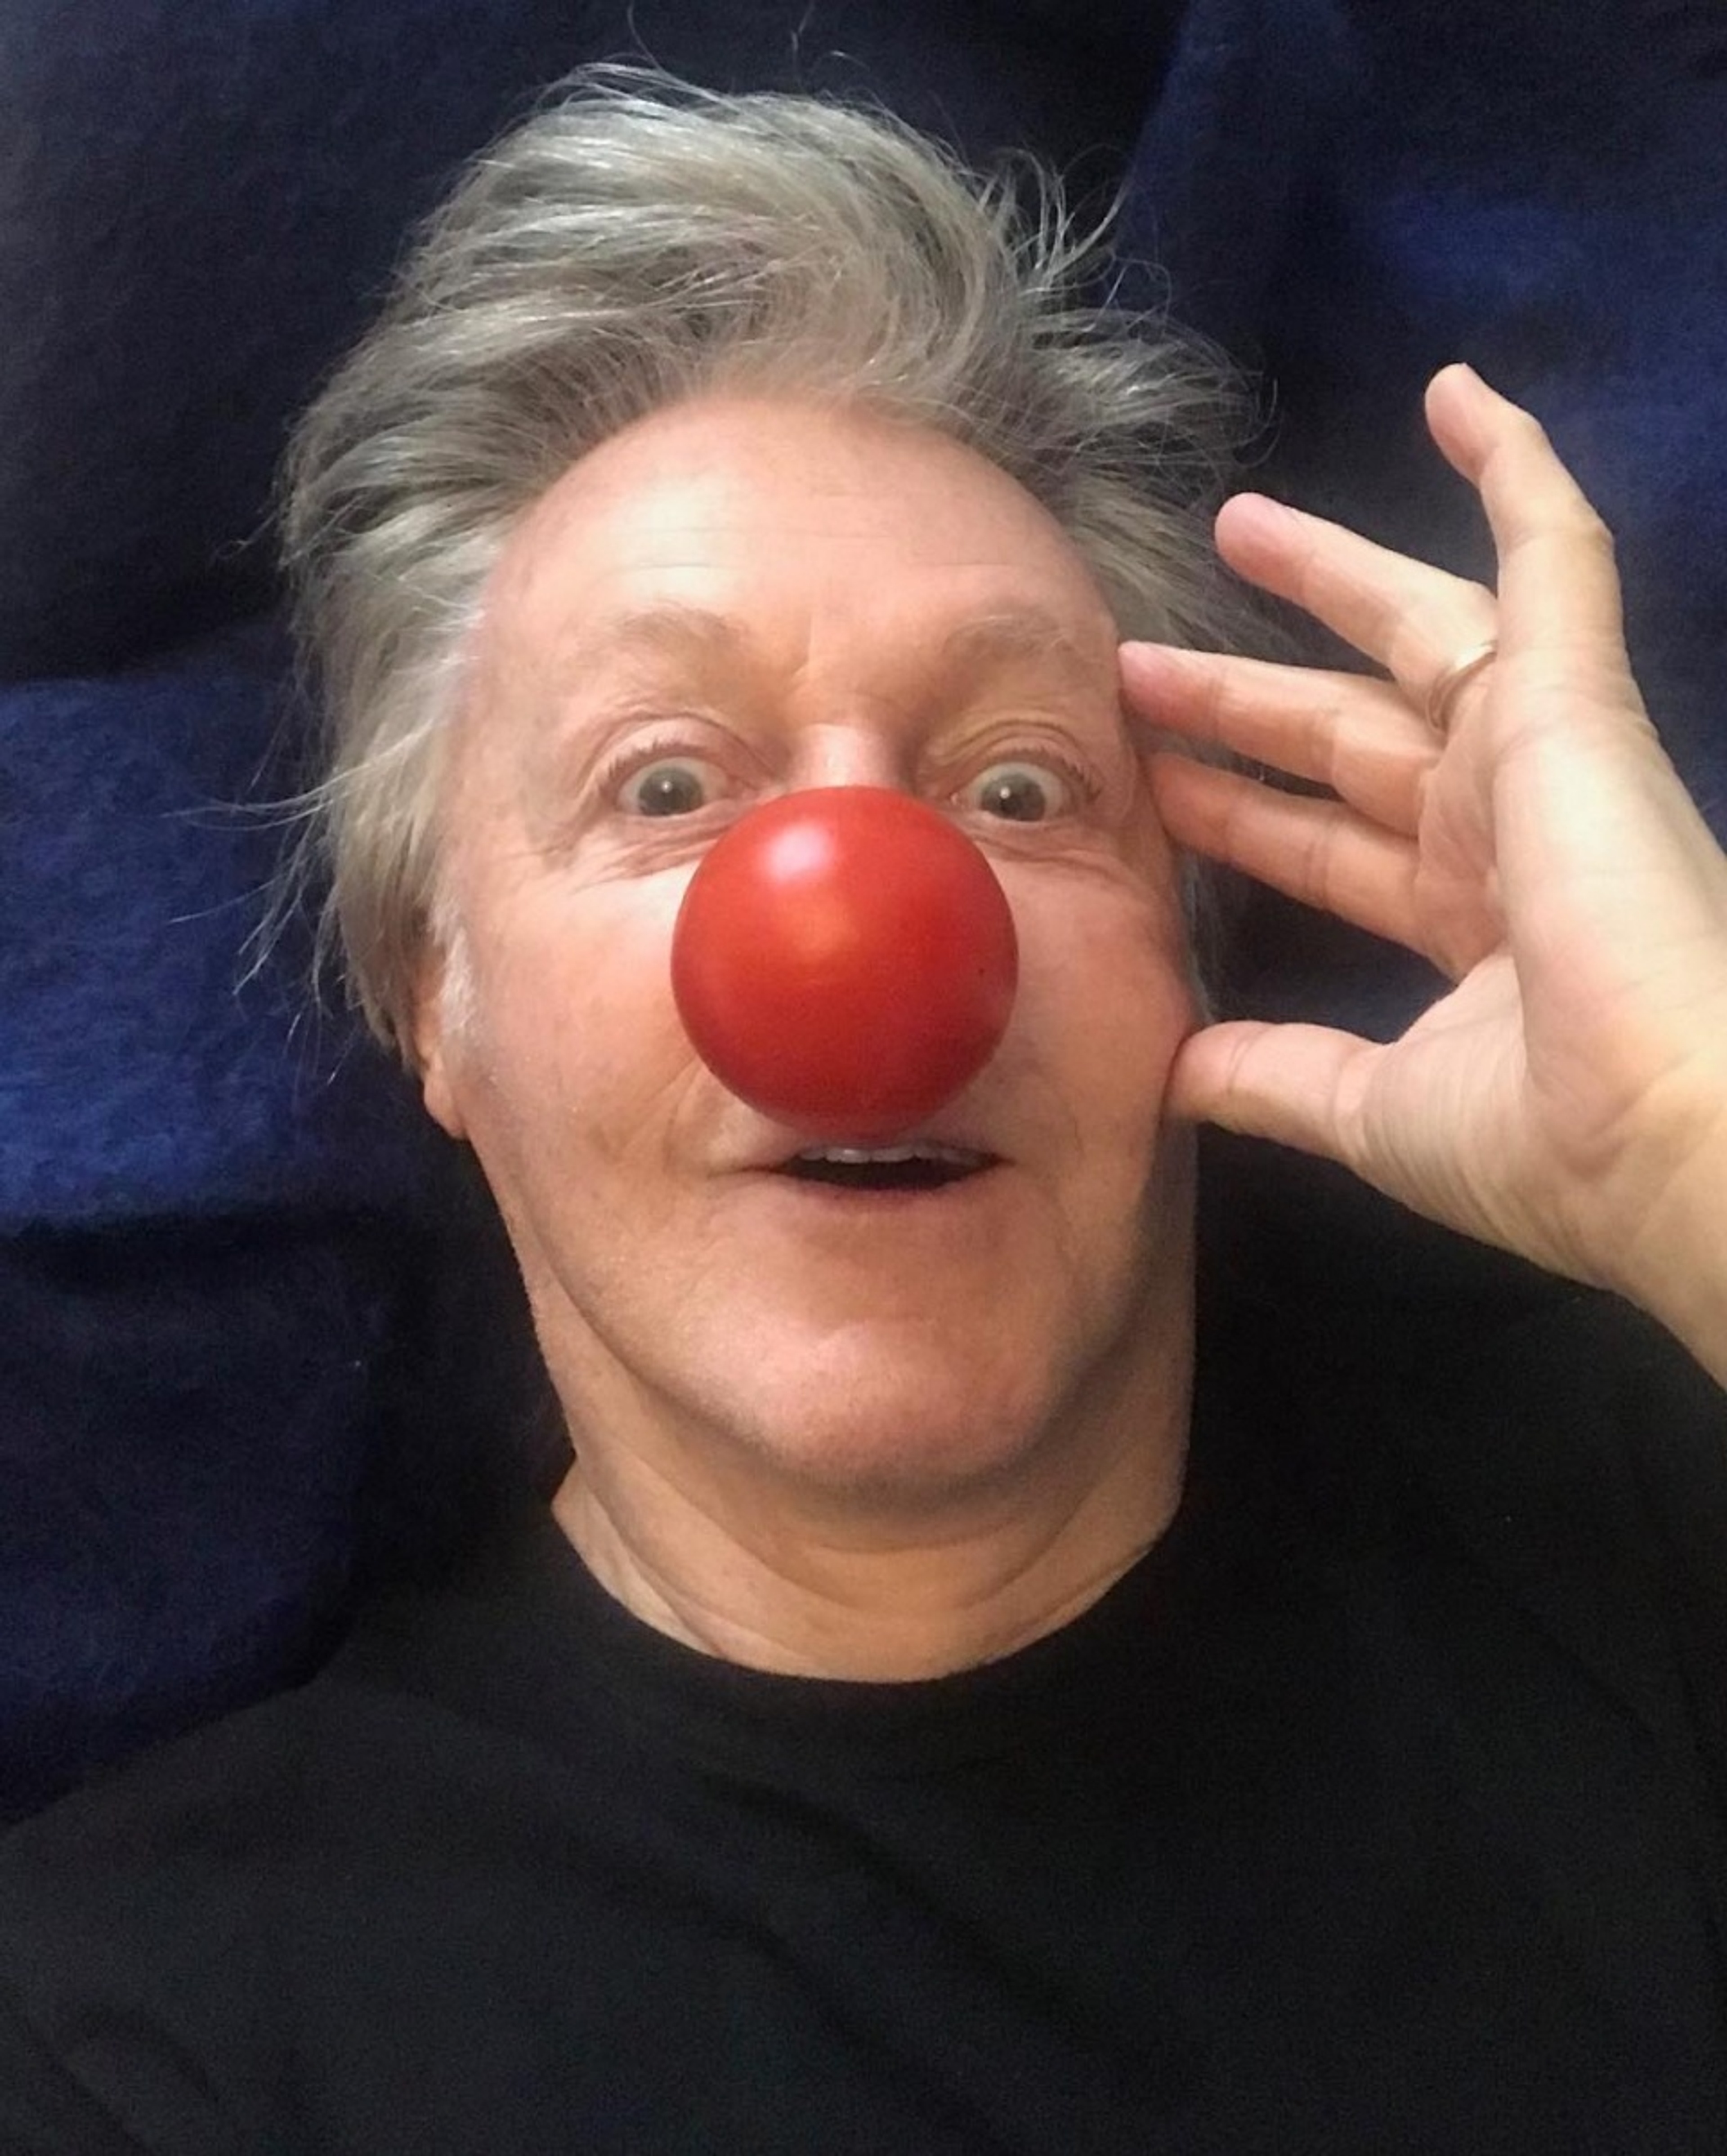 Paul posted a selfie to celebrate Red Nose Day.